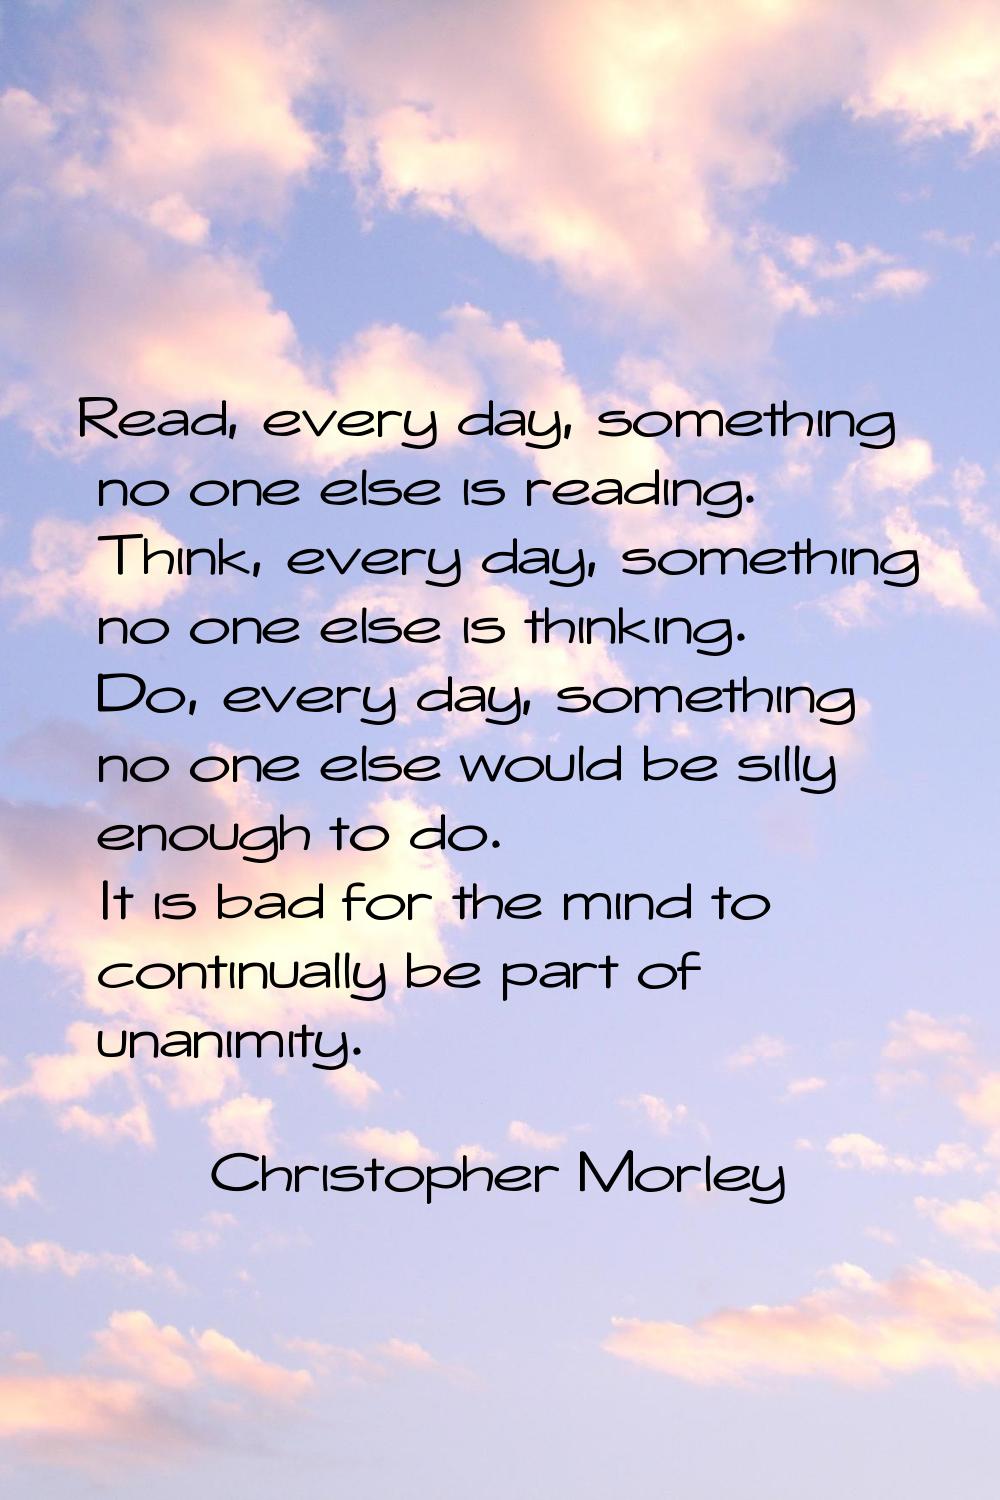 Read, every day, something no one else is reading. Think, every day, something no one else is think